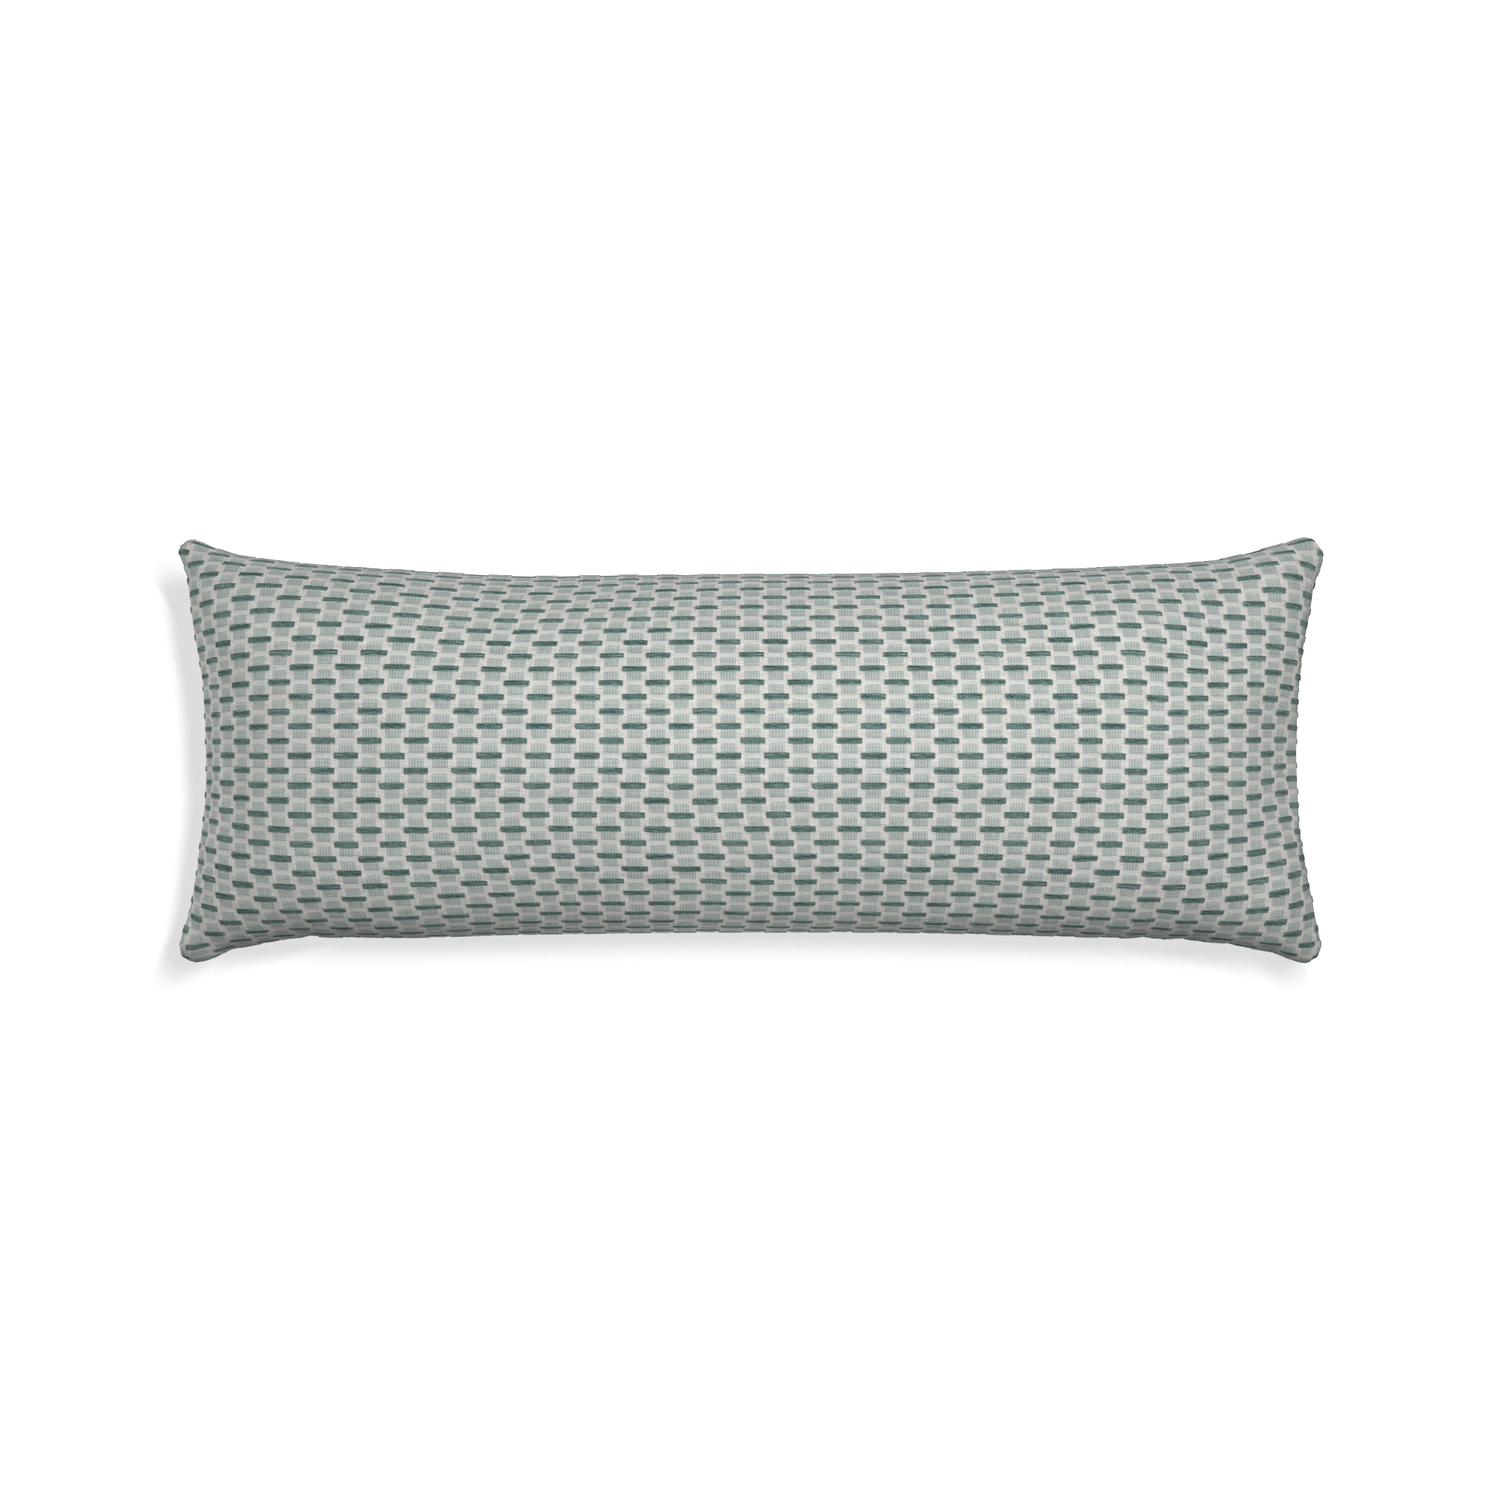 Xl-lumbar willow mint custom green geometric chenillepillow with none on white background